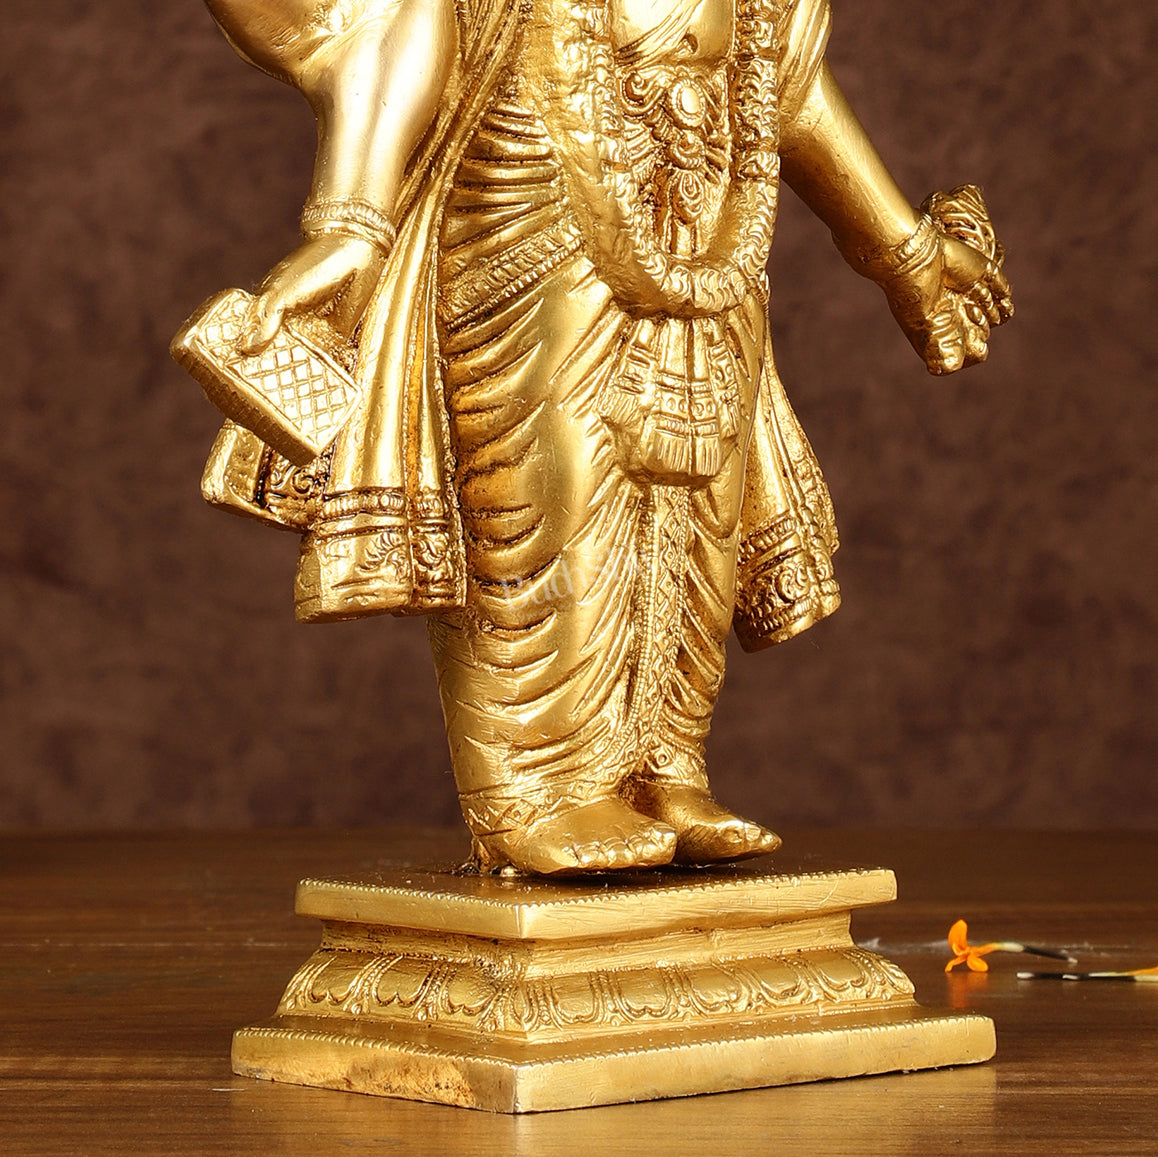 Handcrafted Brass Statue of Lord Dhanvantari, the God of Ayurveda | 10"